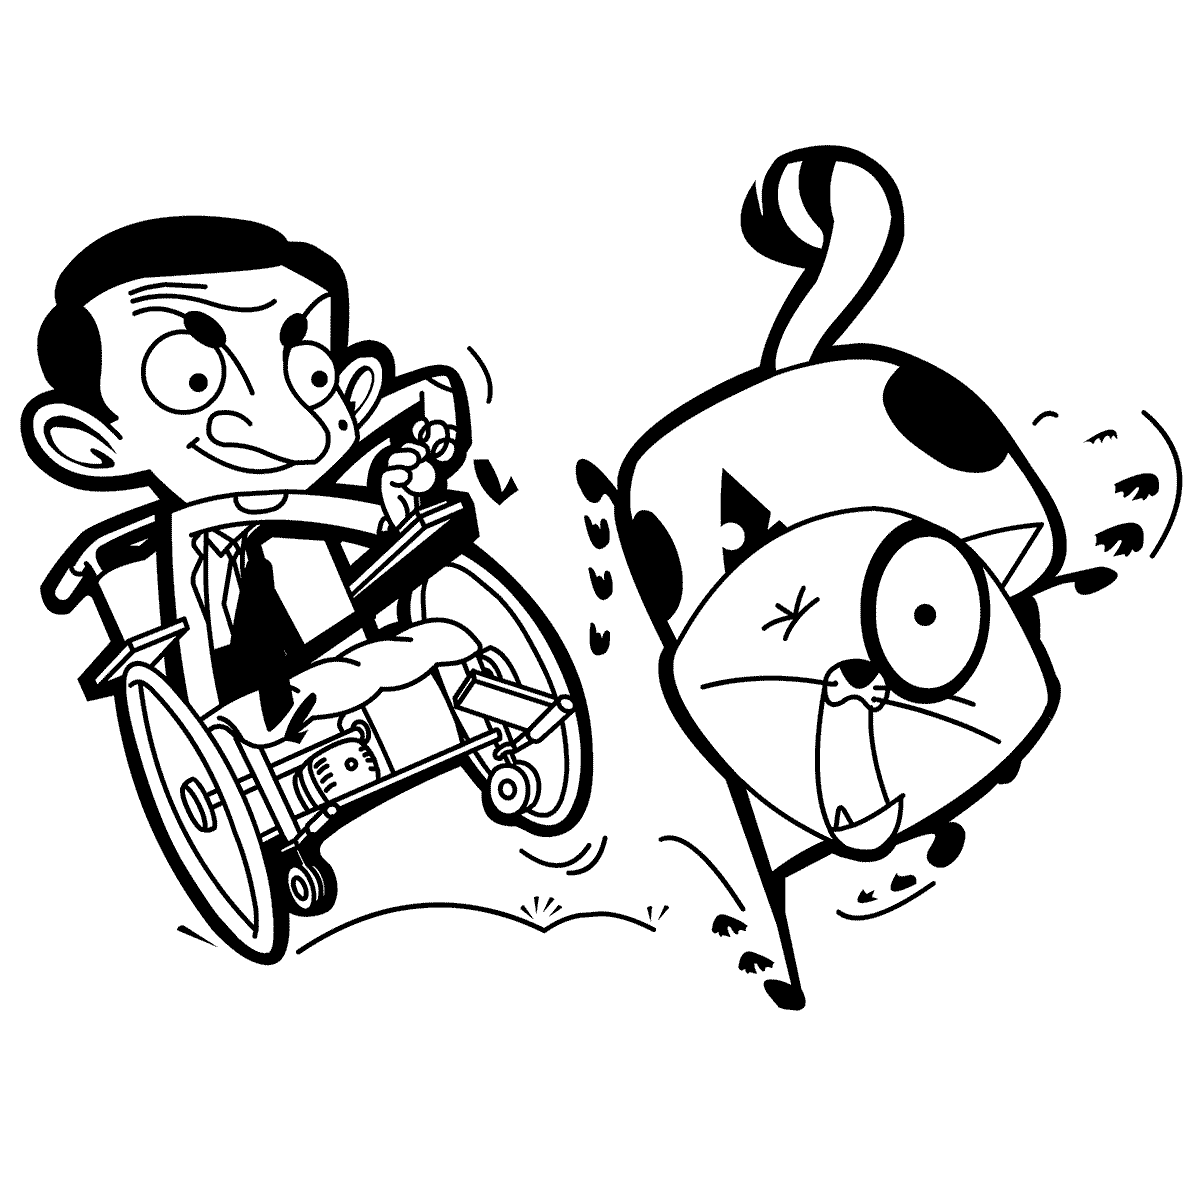 Mr Bean Coloring Book Game Coloring Pages